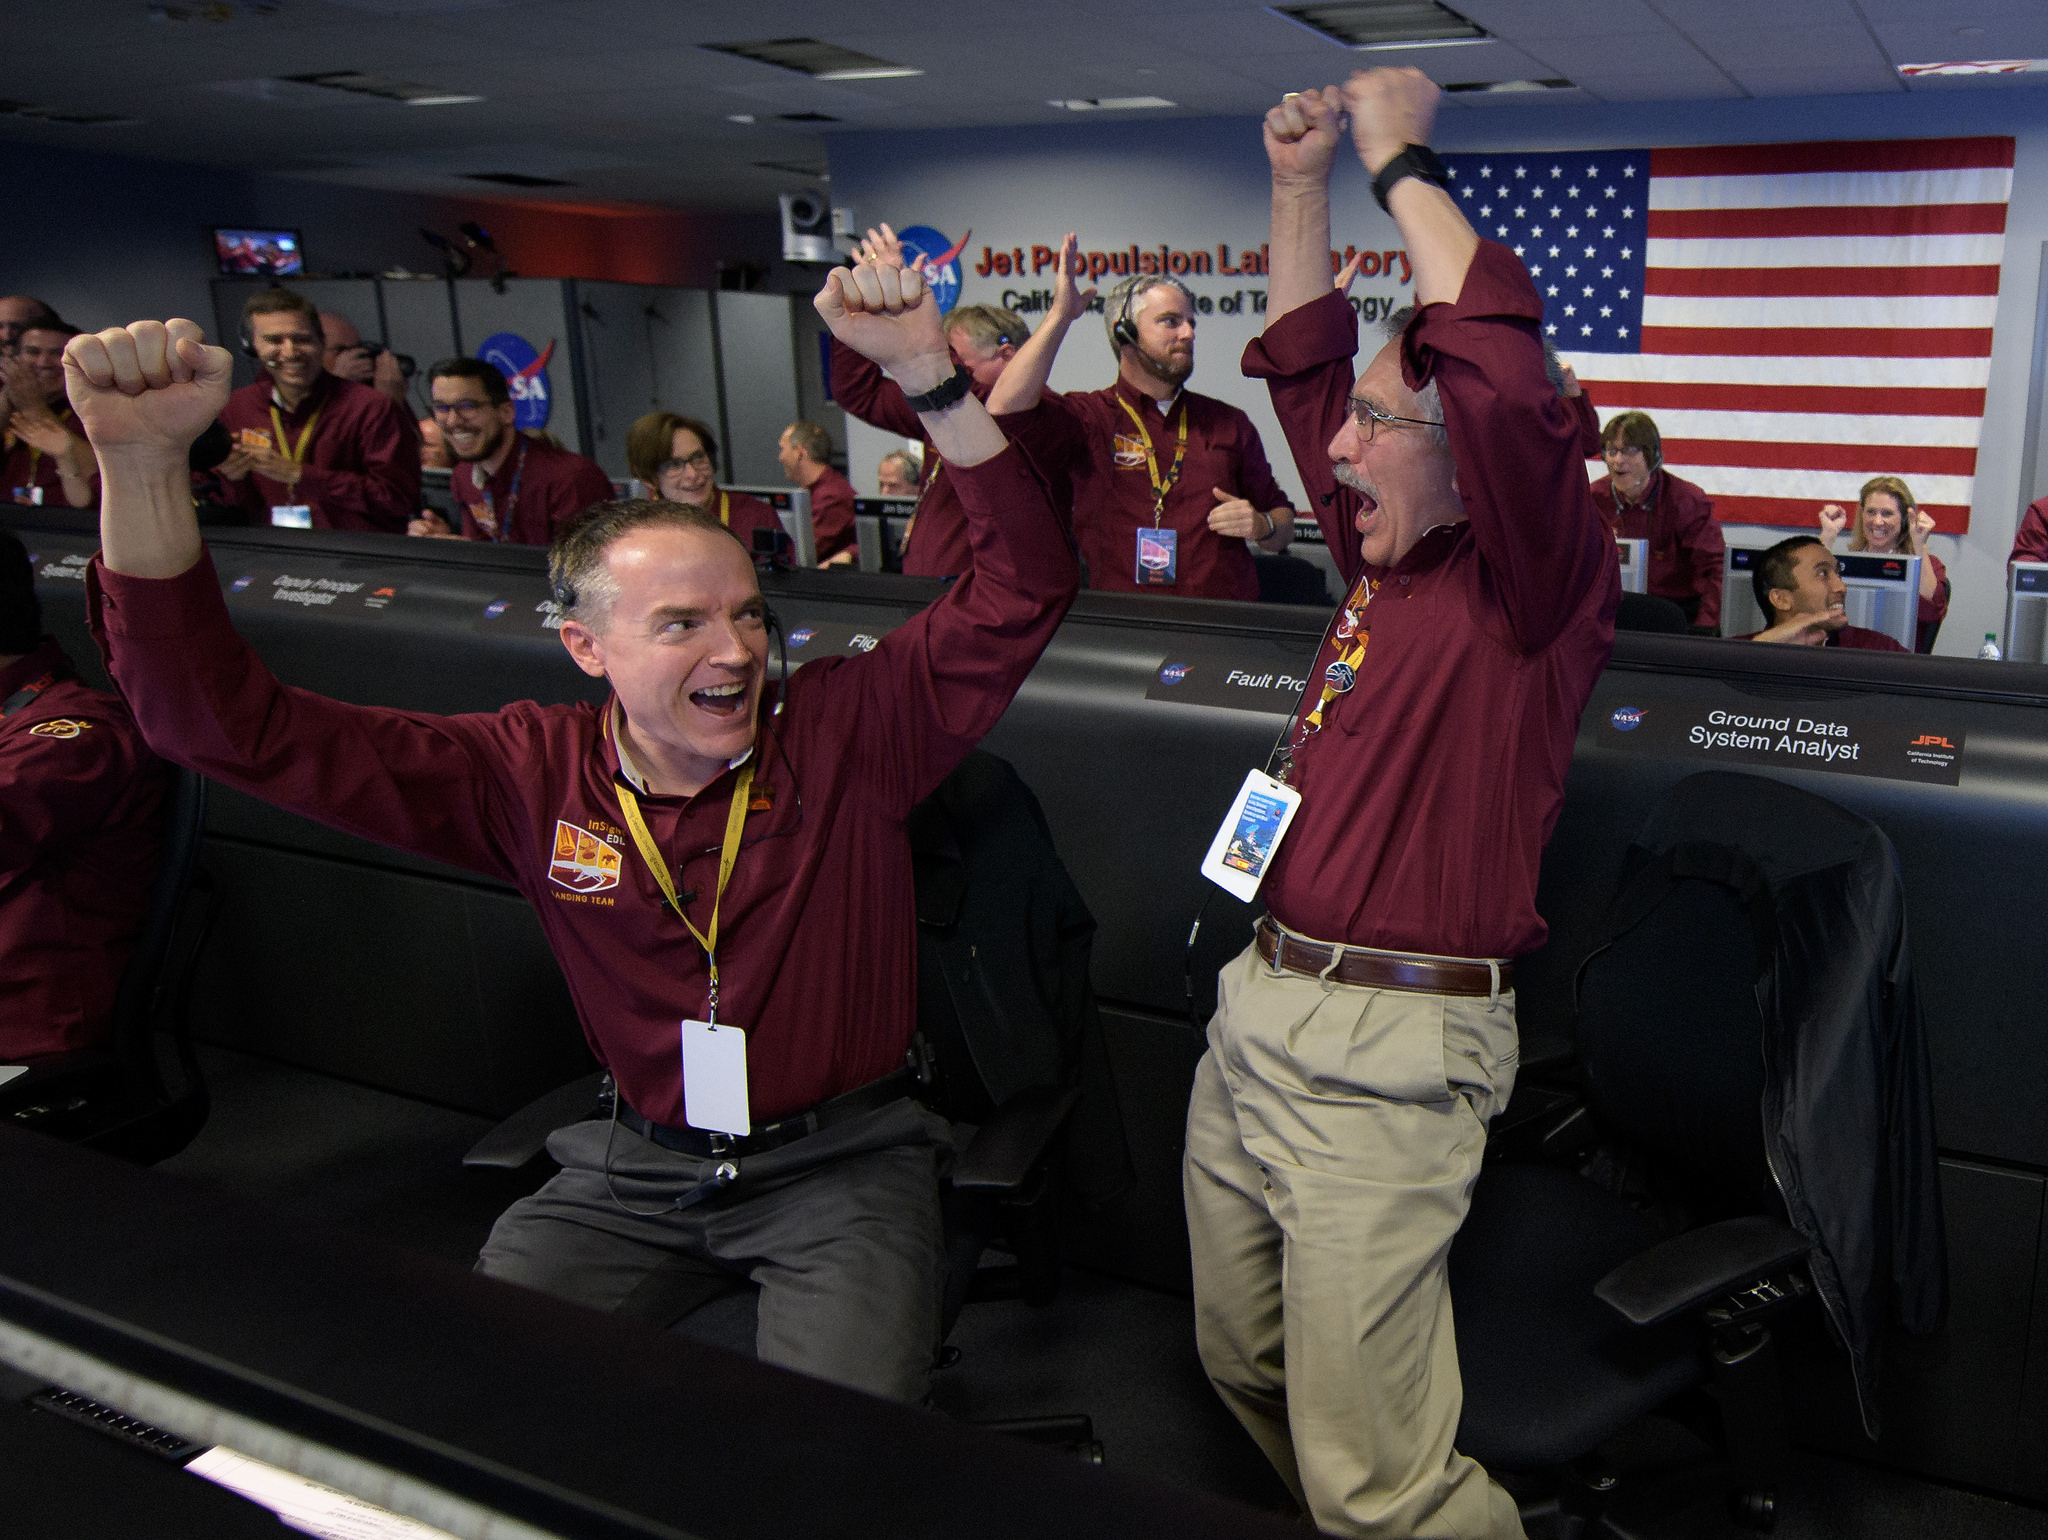 Mars InSight team members Kris Bruvold, left, and Sandy Krasner react after receiving confirmation that InSight landed